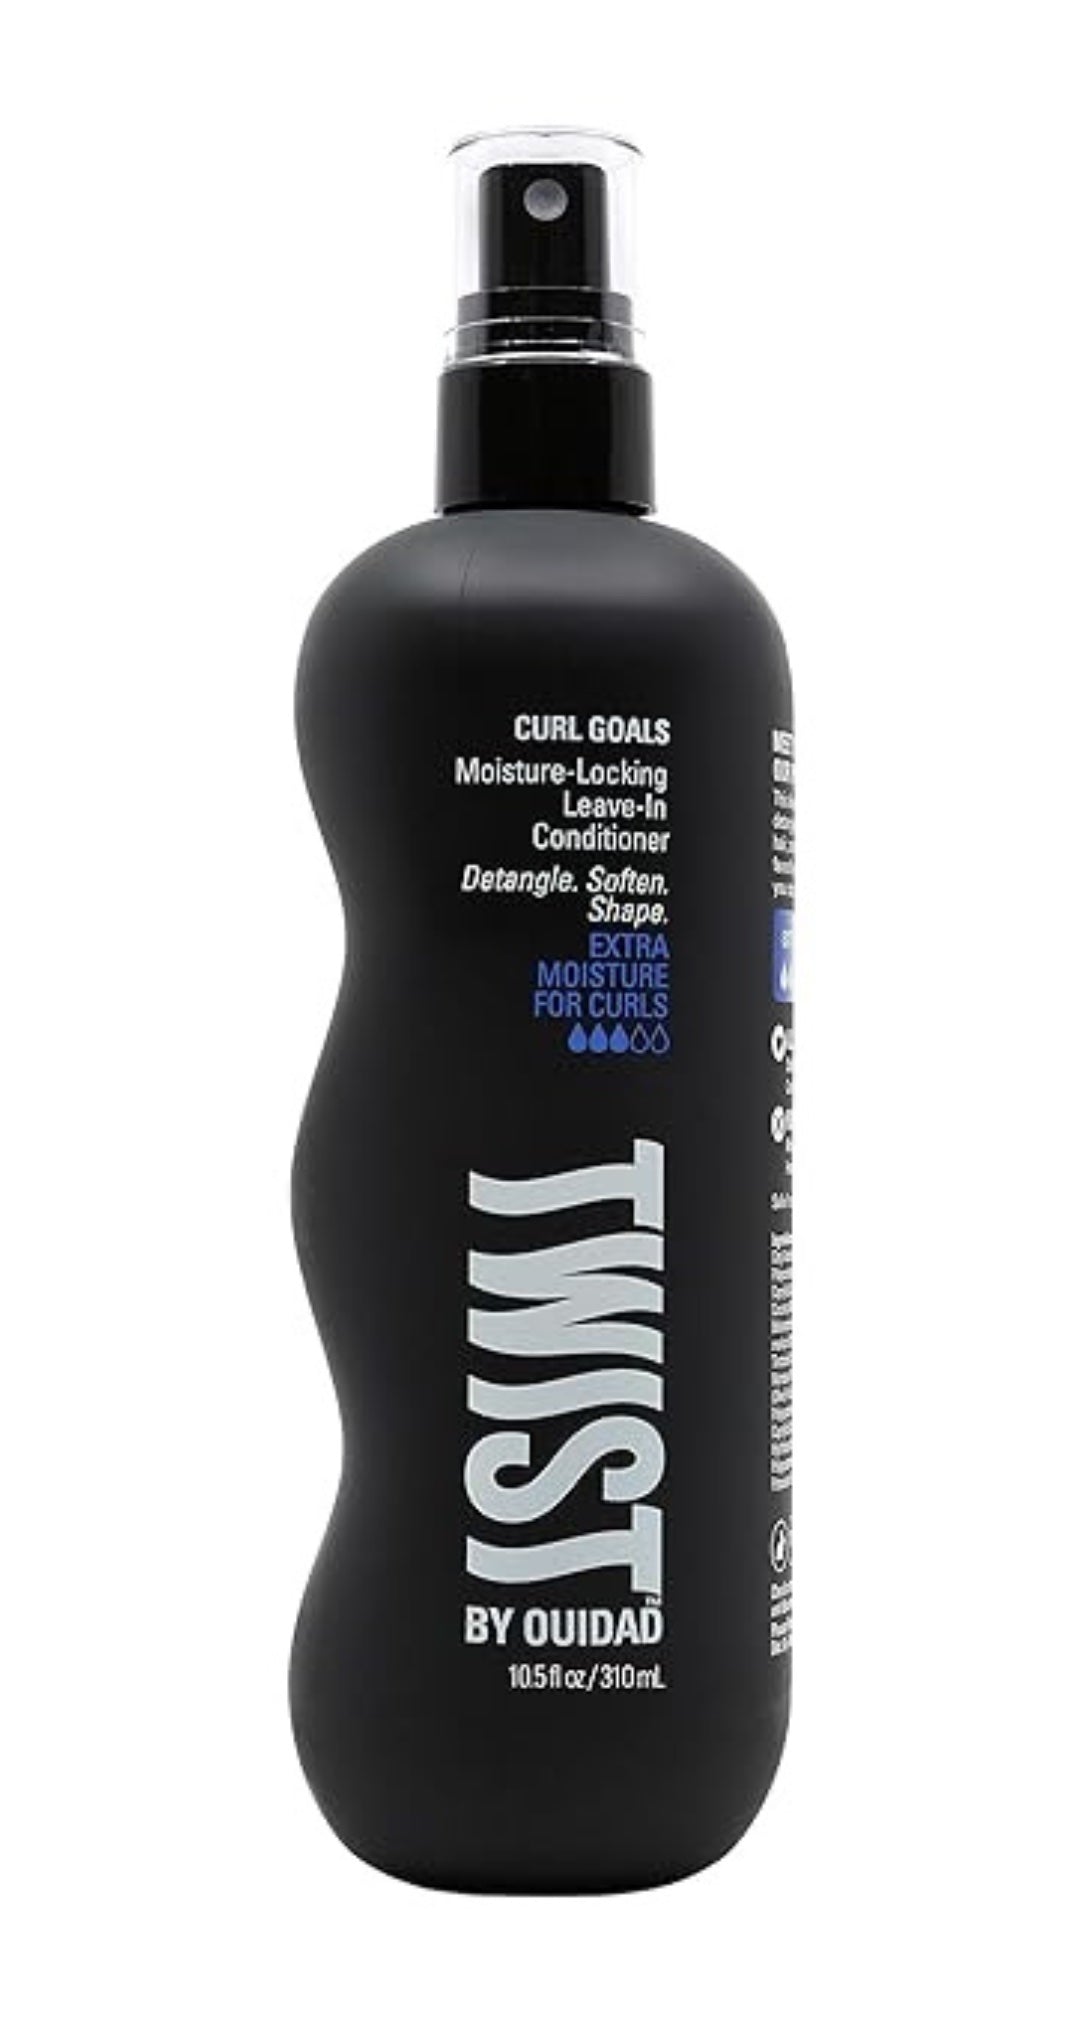 TWIST, BY OUIDAD - Moisture Locking Leave-In Conditioner